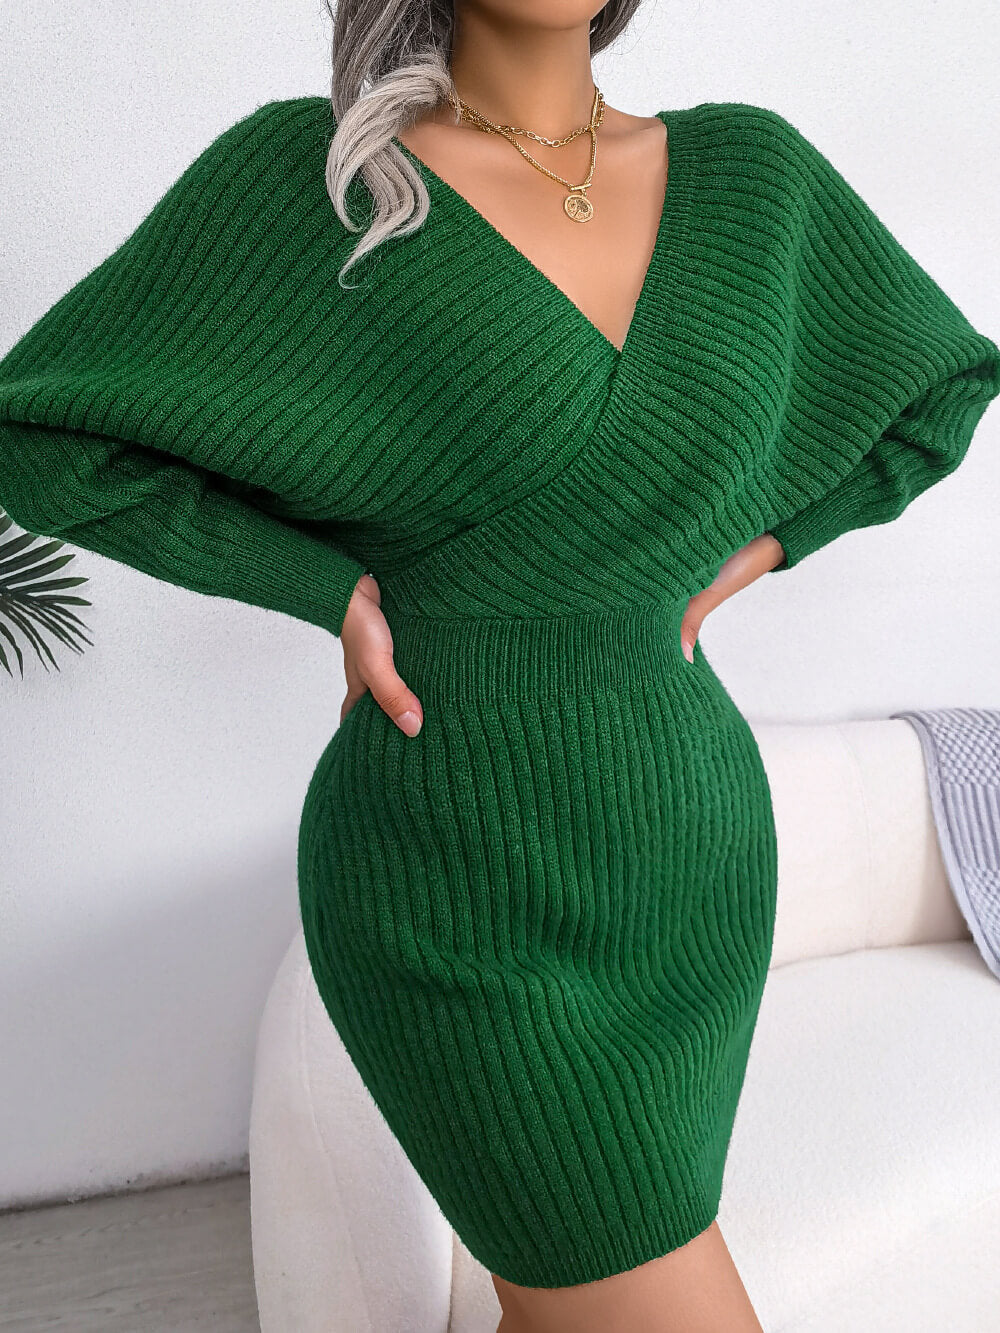 Cross V-Neck Spring Sheath Skirt bodycon dresses knitted spring collection sweater dresses sweaters sweatshirts malbusaat.co.uk